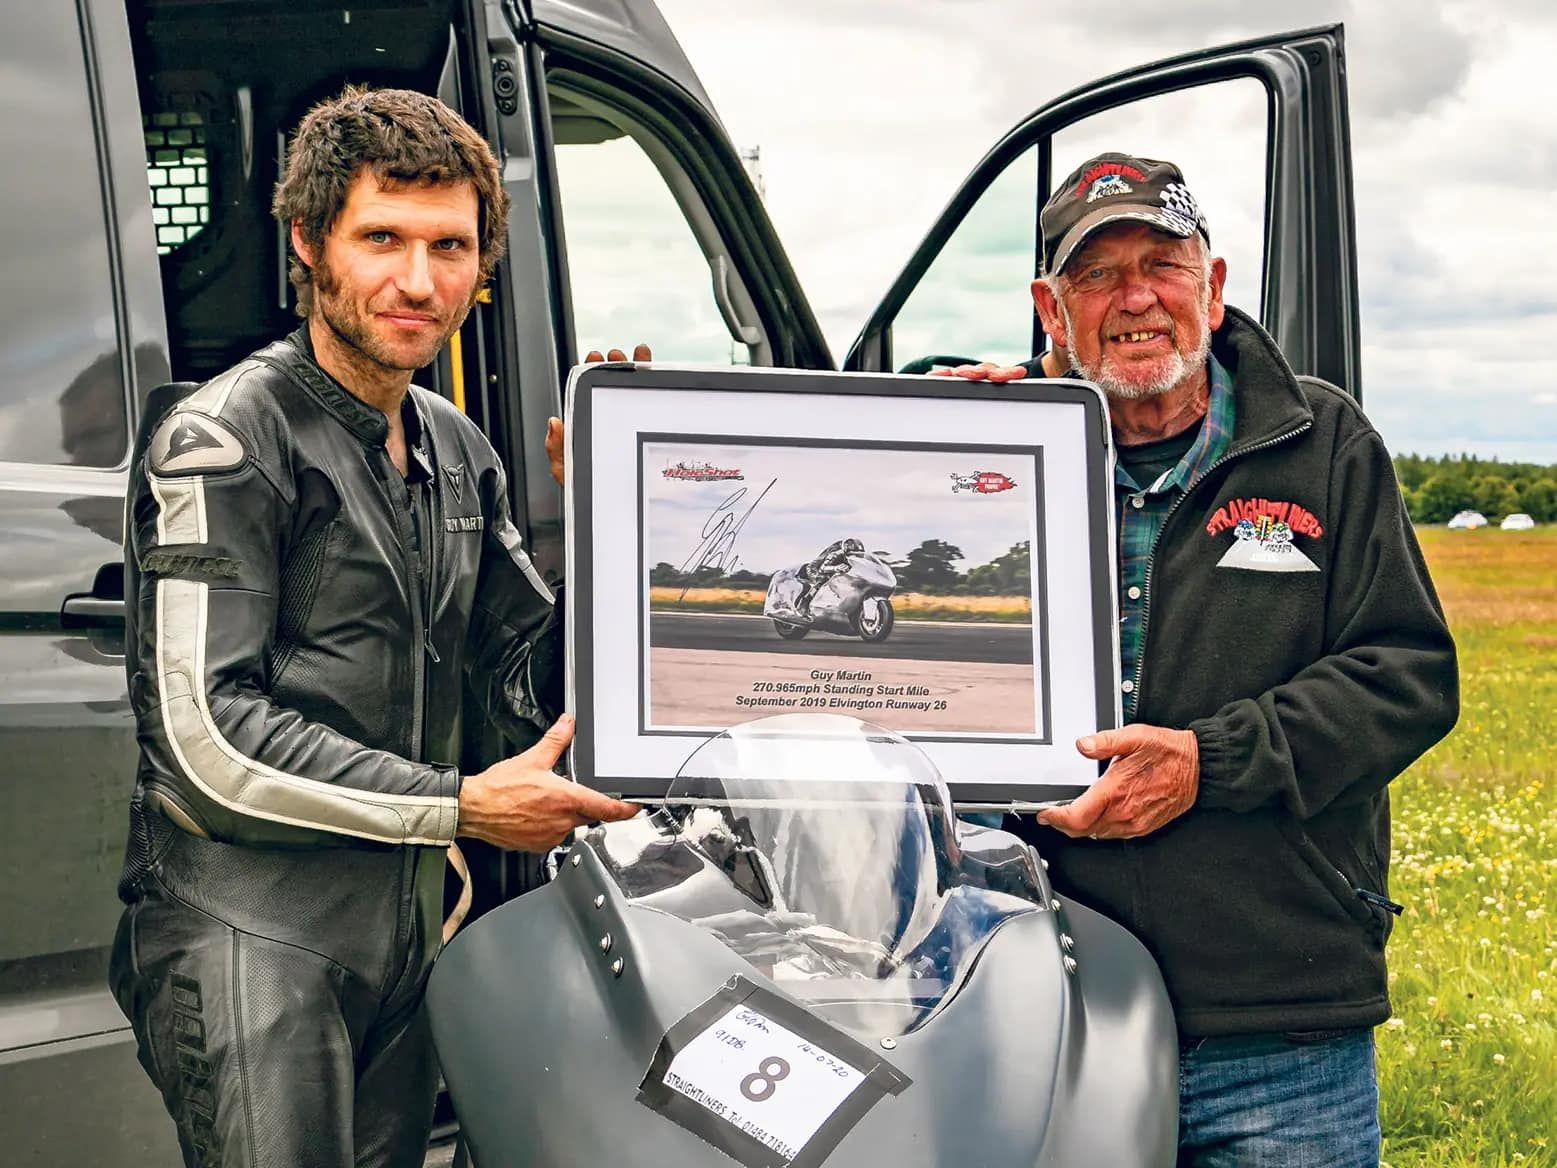 Guy Martin holding a framed images over his land speed record Suzuki Hayabusa.